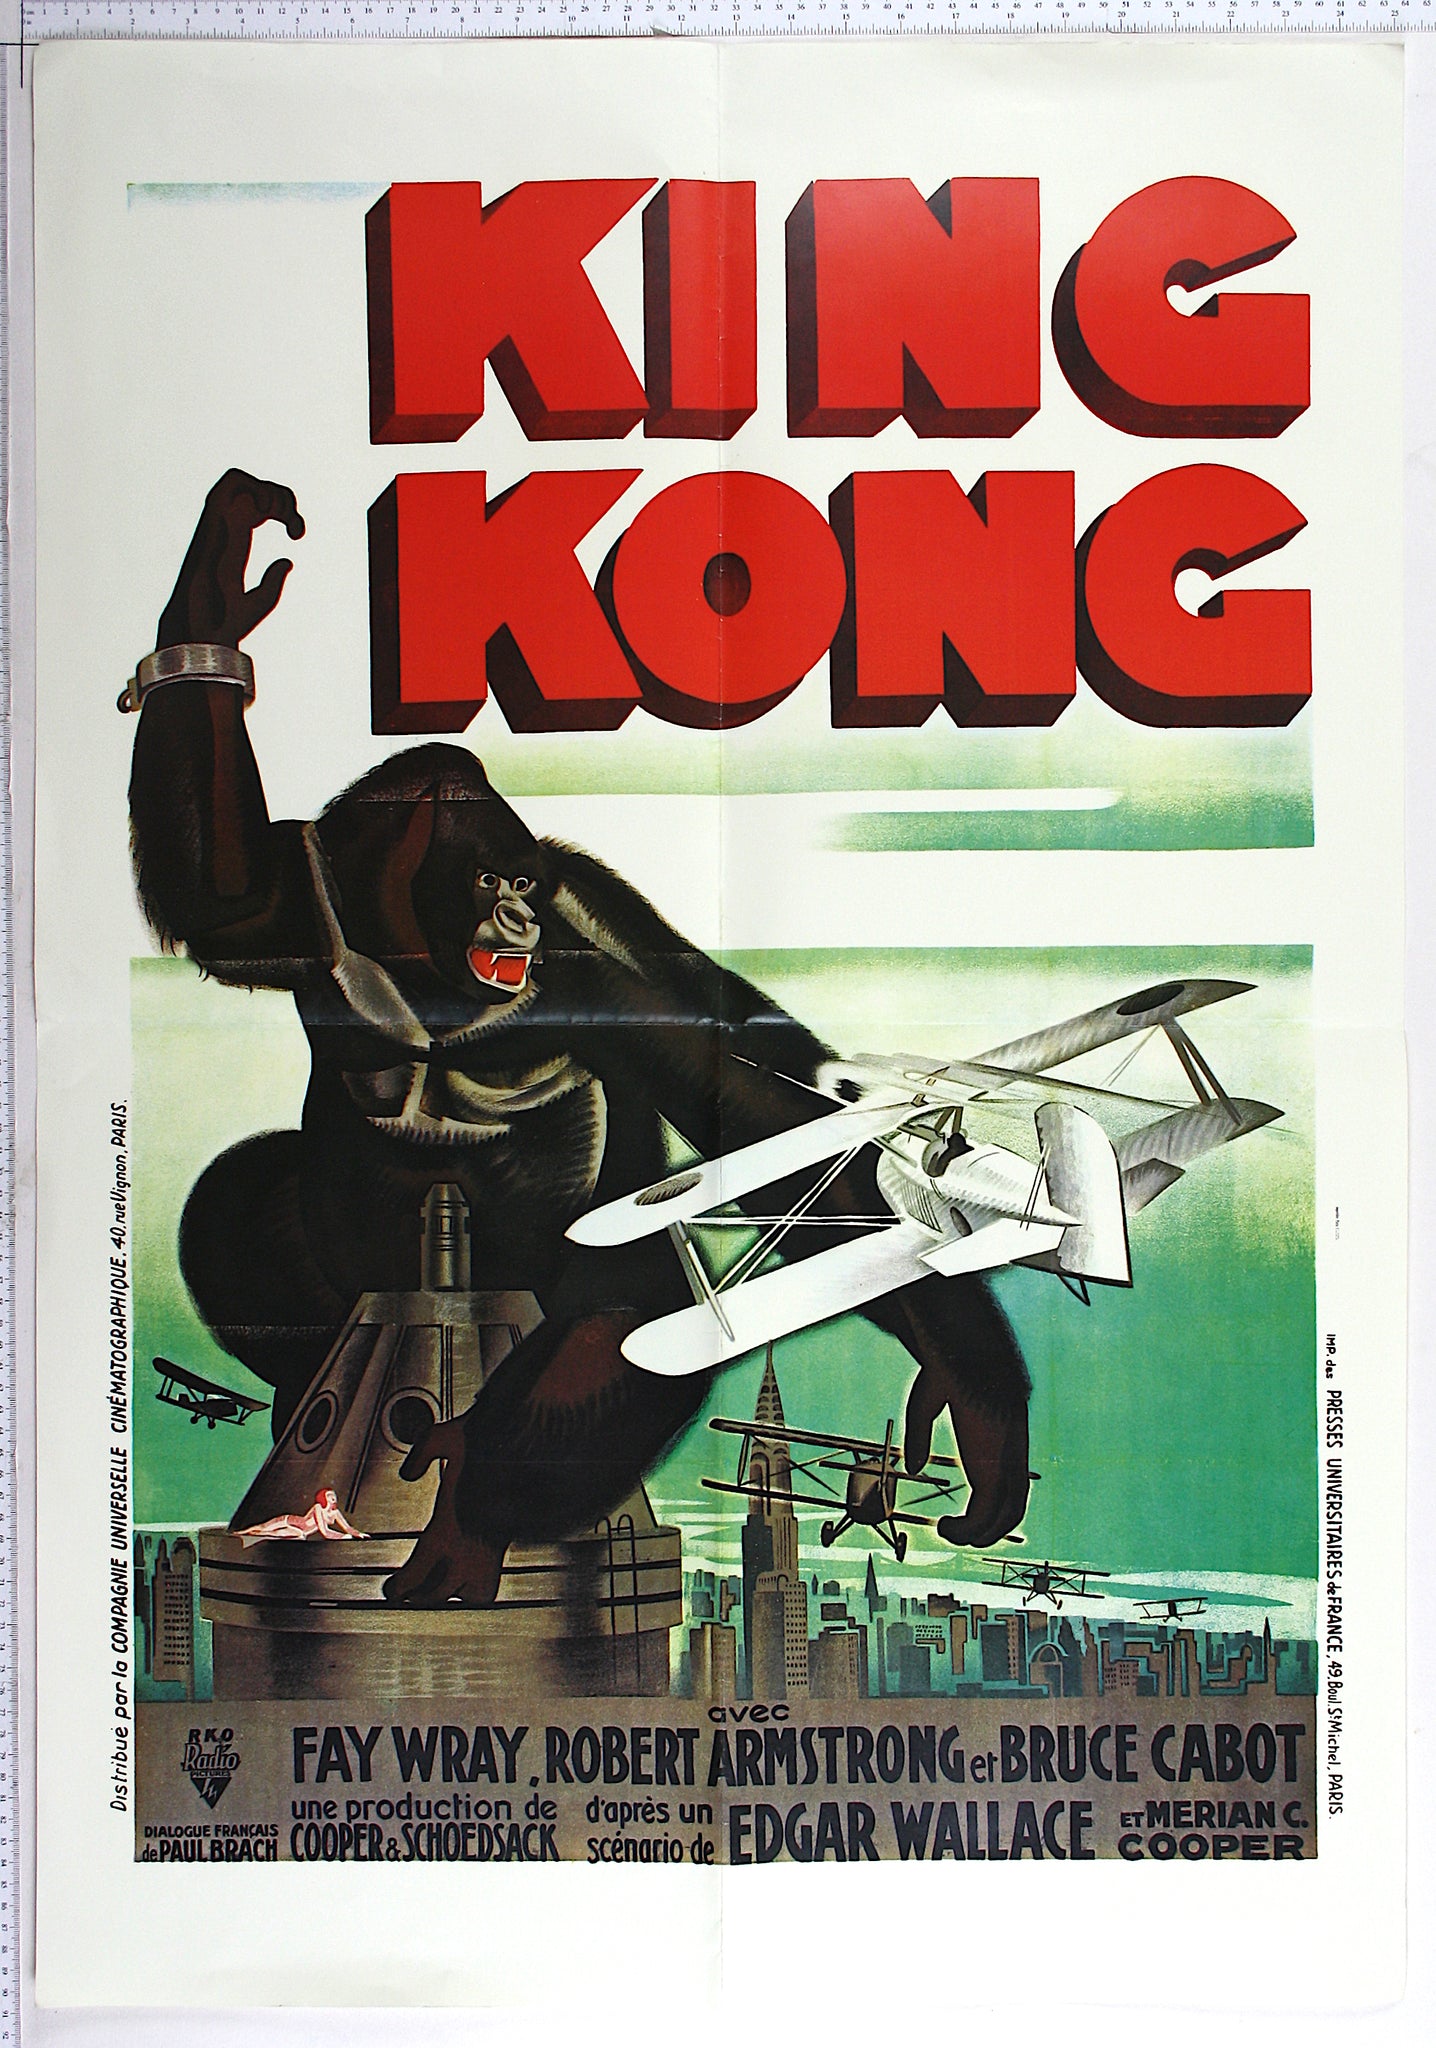 King Kong (1933 / 2001RR) French Commercial Poster